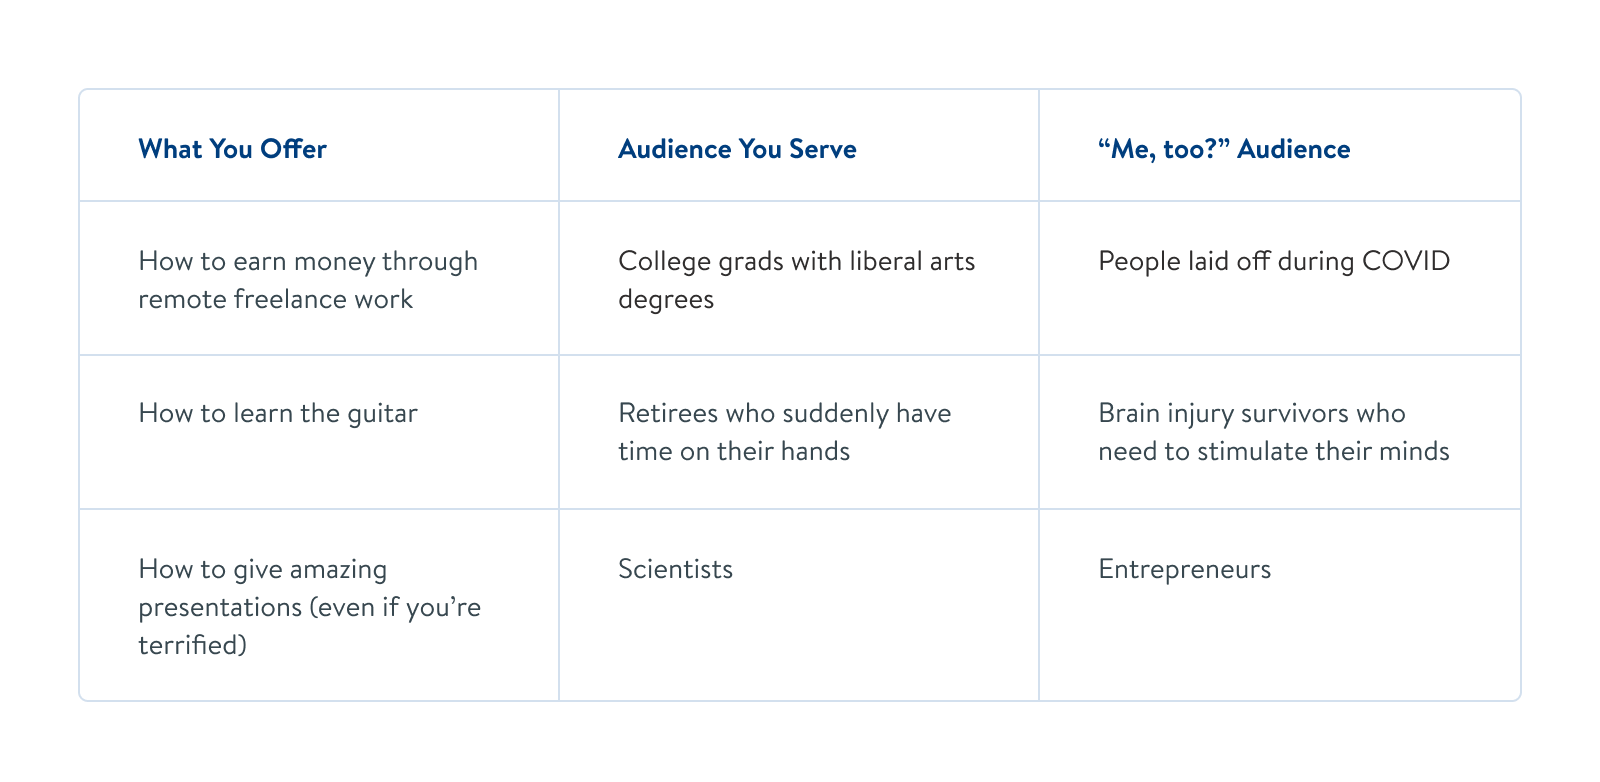 What you offer, Audience you serve, "Me, too!" Audience